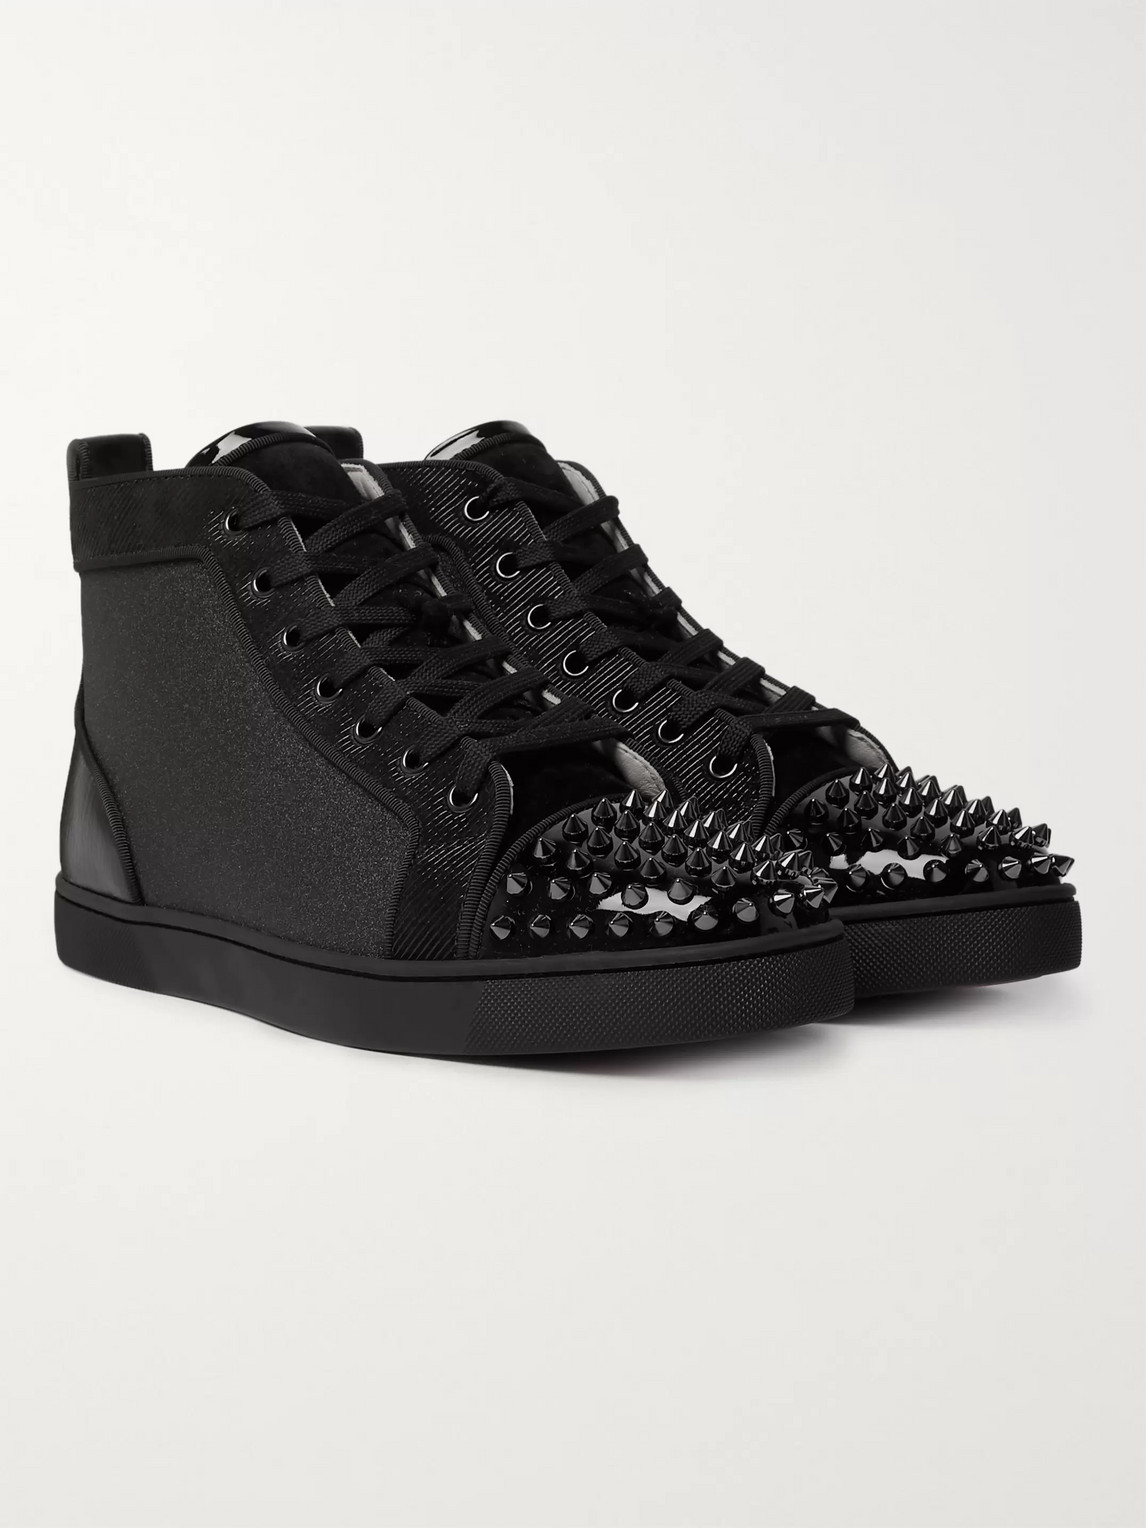 CHRISTIAN LOUBOUTIN LOU SPIKES ORLATO VELVET, GLITTERED CANVAS, SUEDE AND LEATHER HIGH-TOP SNEAKERS